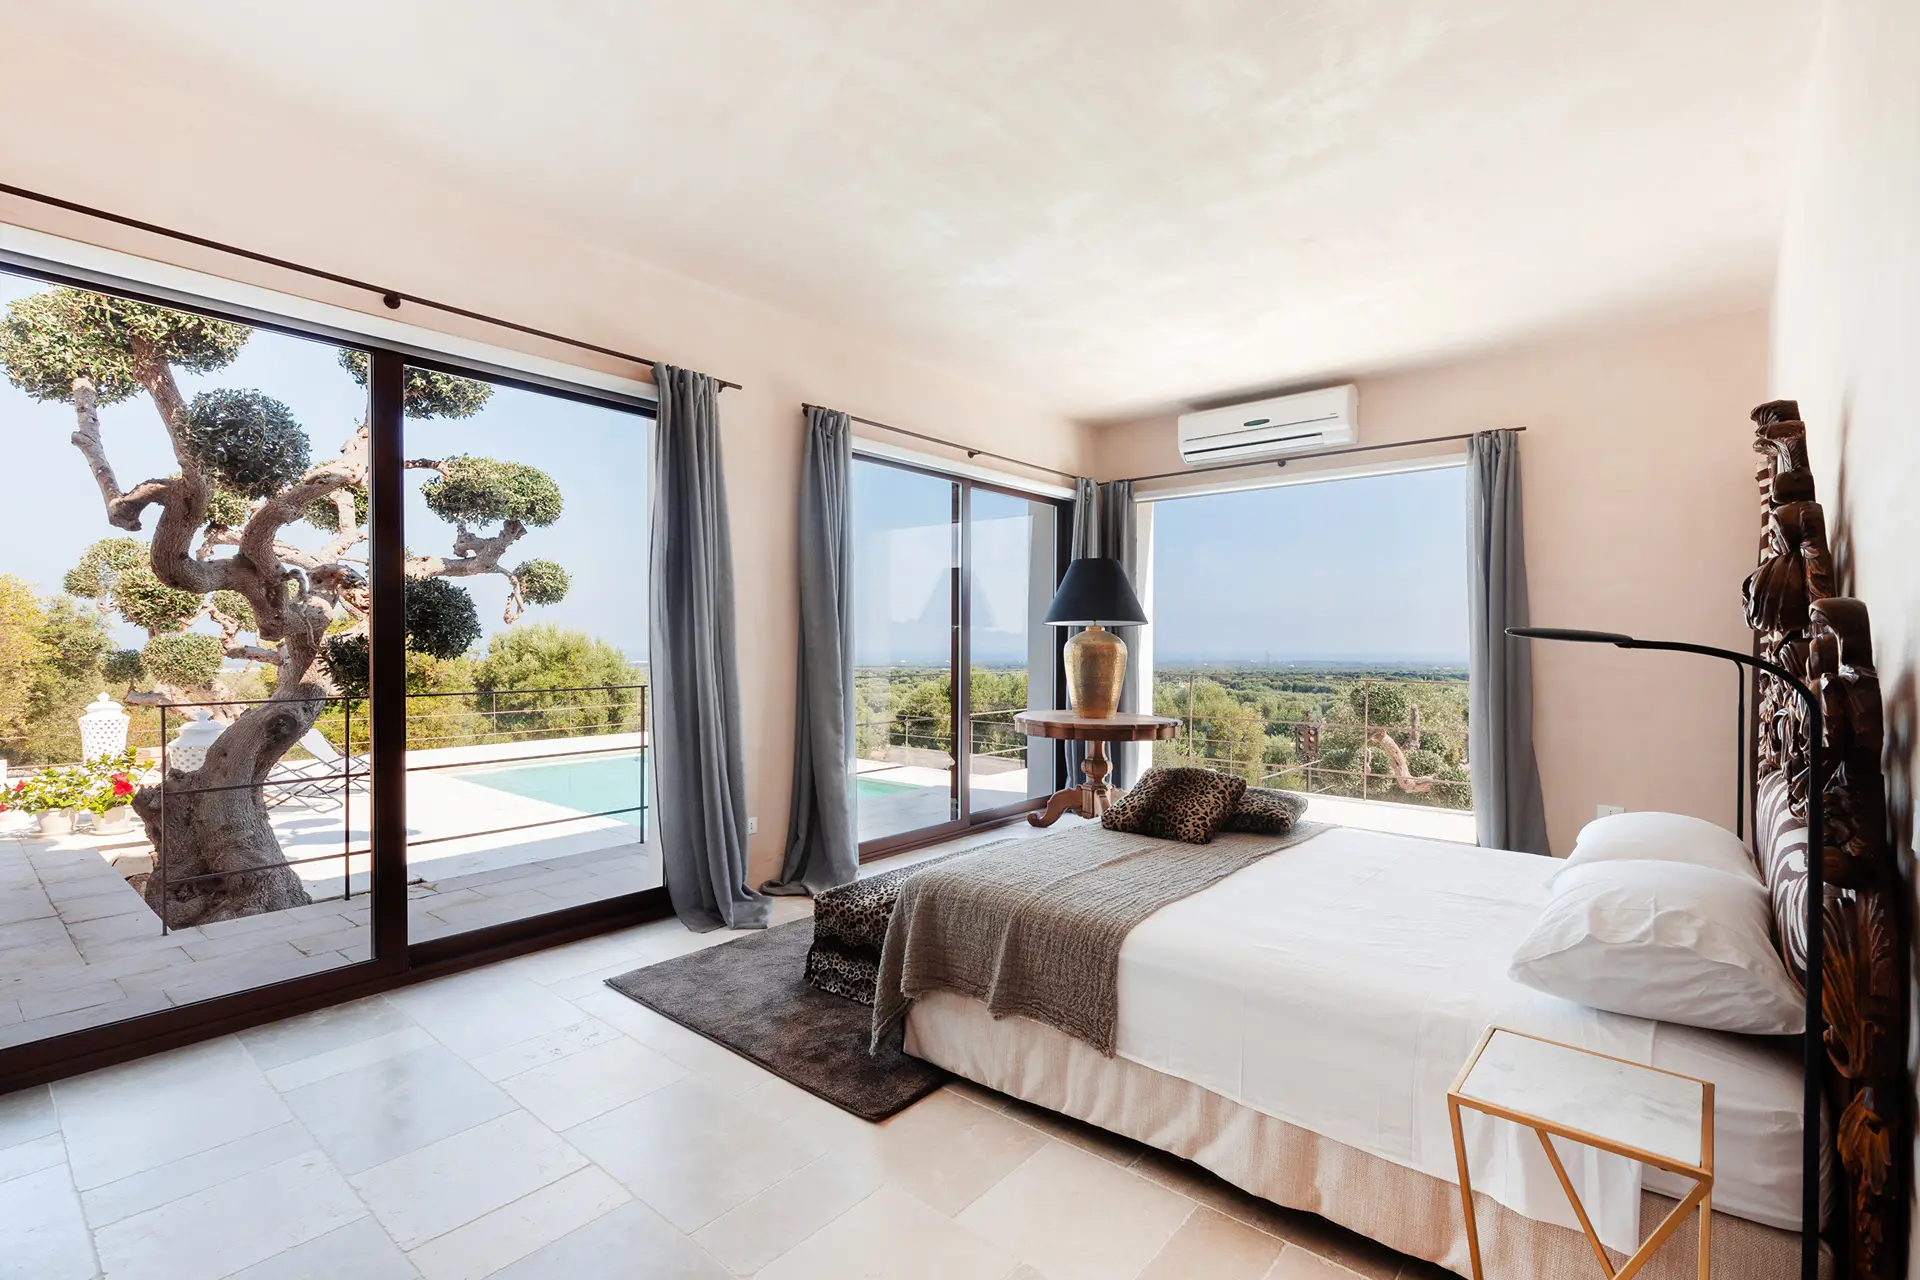 Master bedroom with 2 ensuites, seaview, pool view